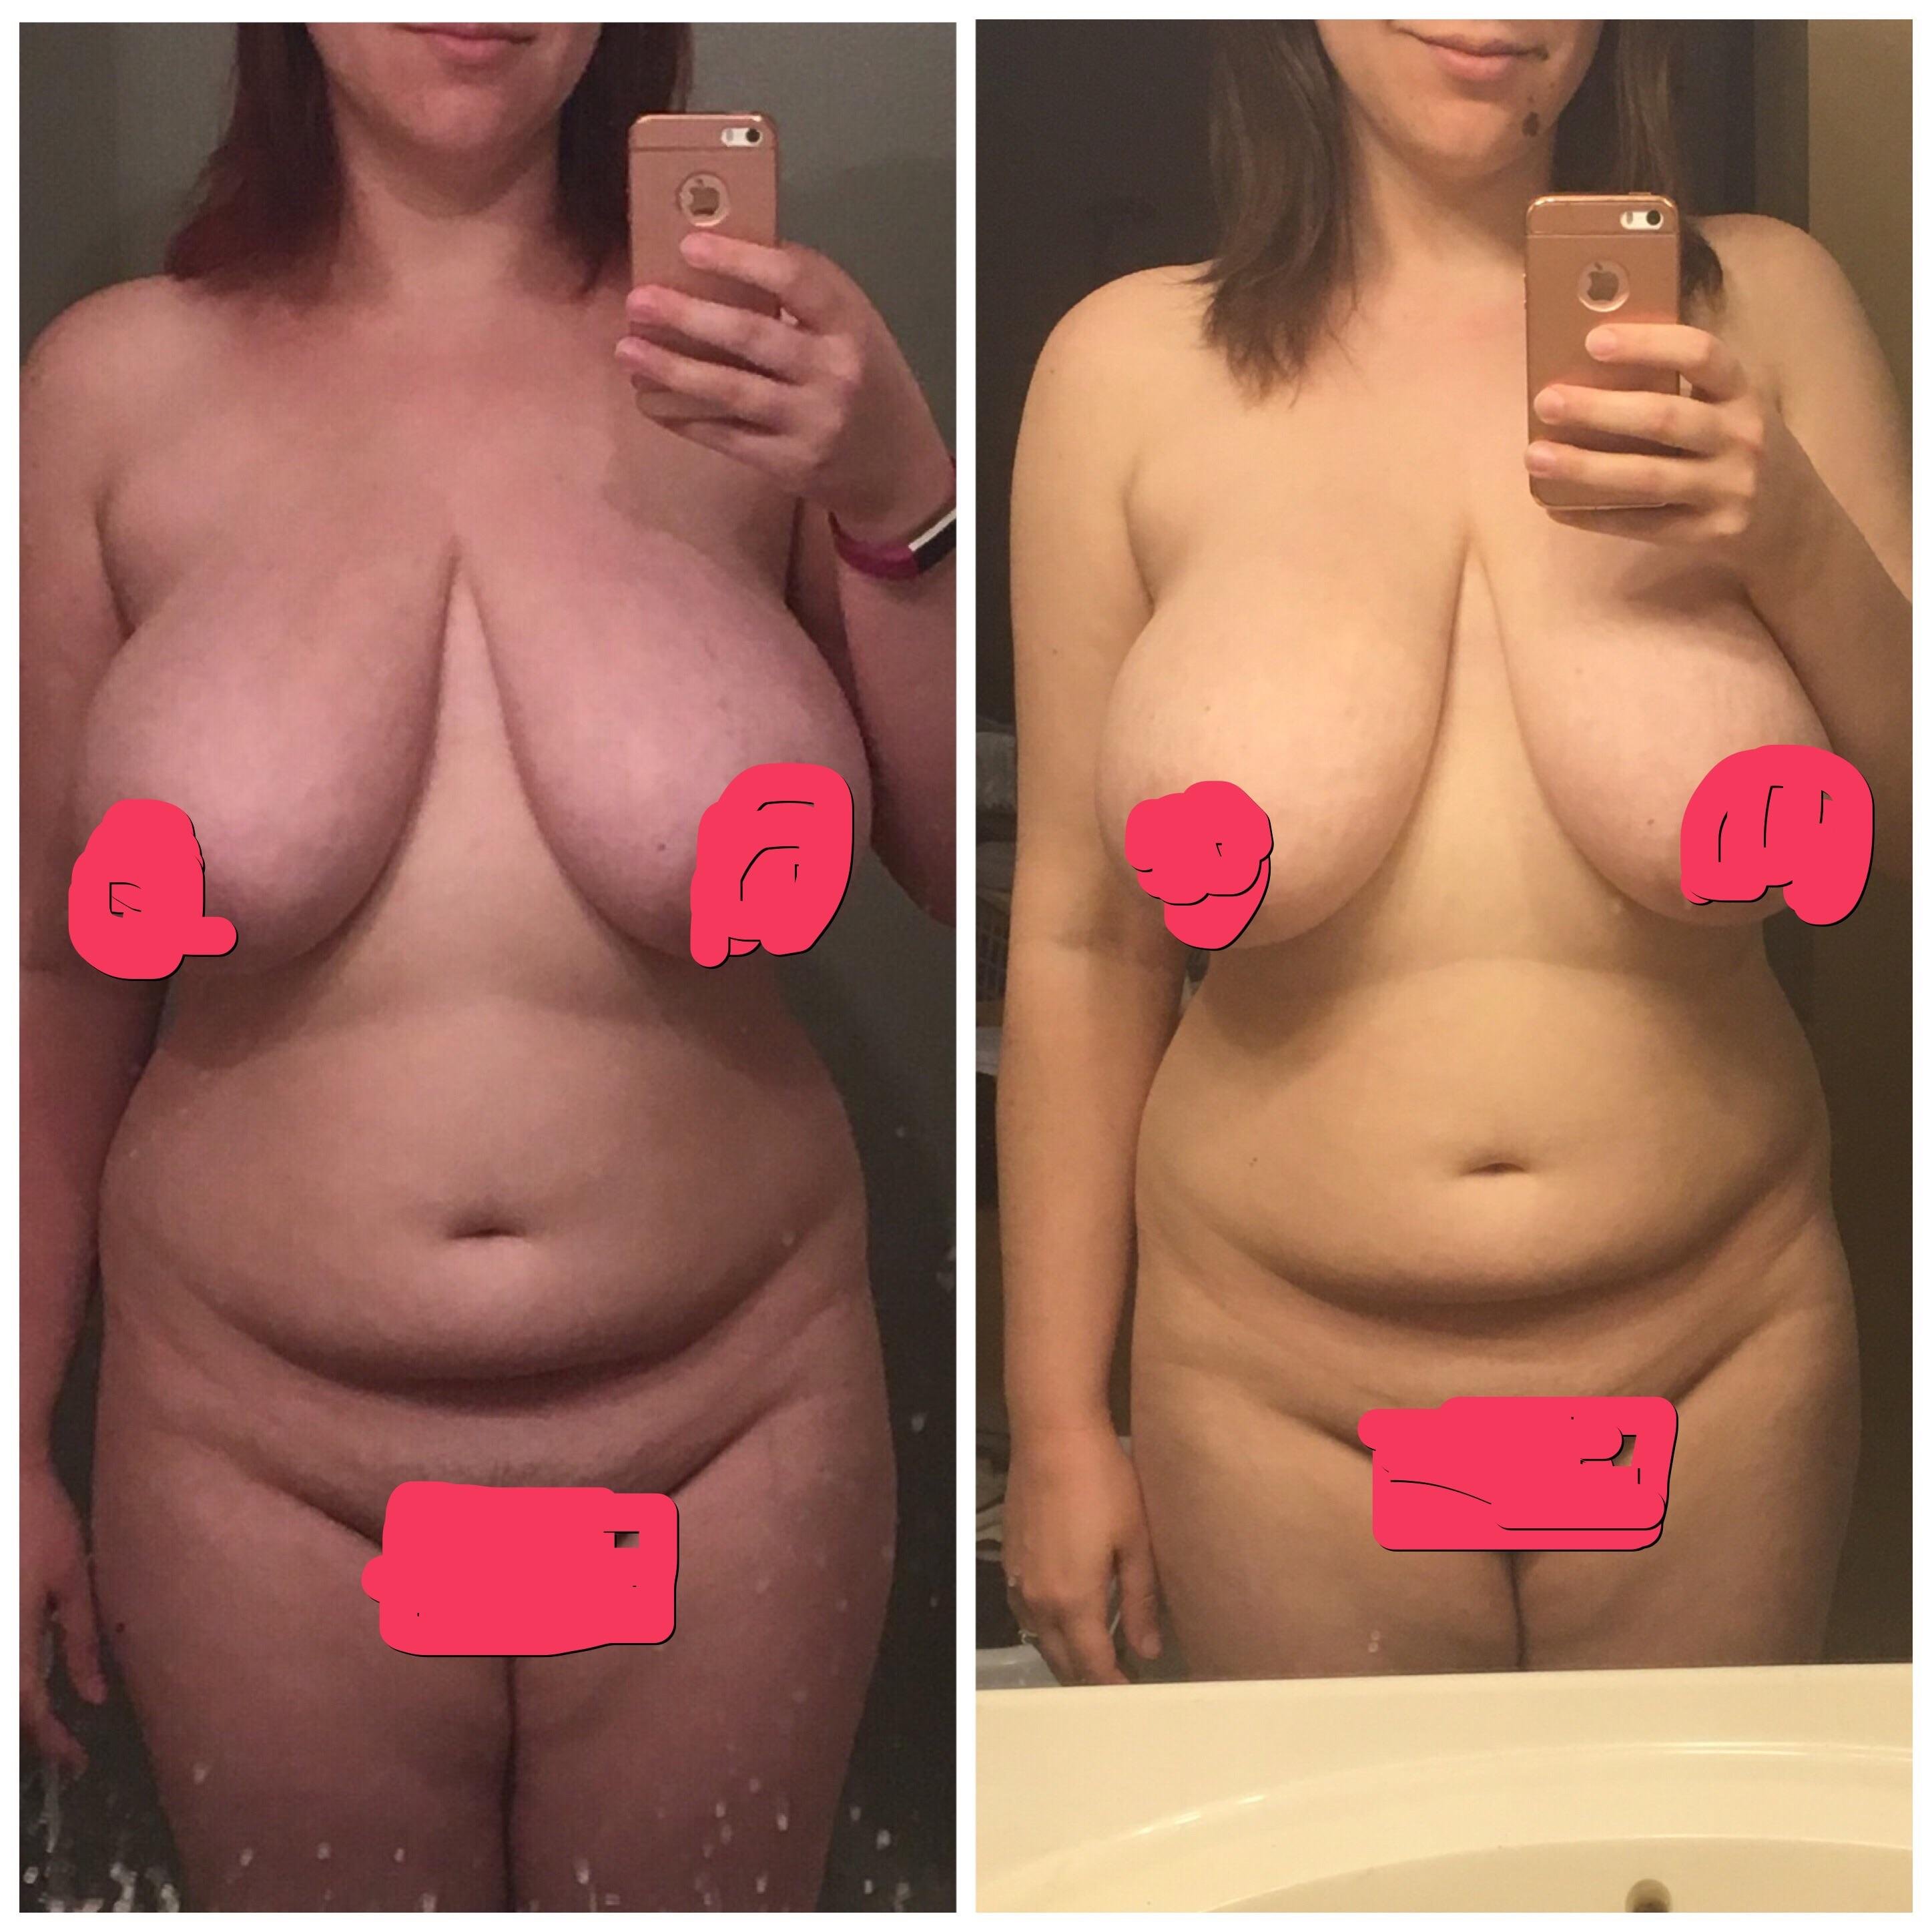 5 months. 160lbs &gt; 145lbs. Still struggling with my body image/feeling good naked, but proud of my progress!